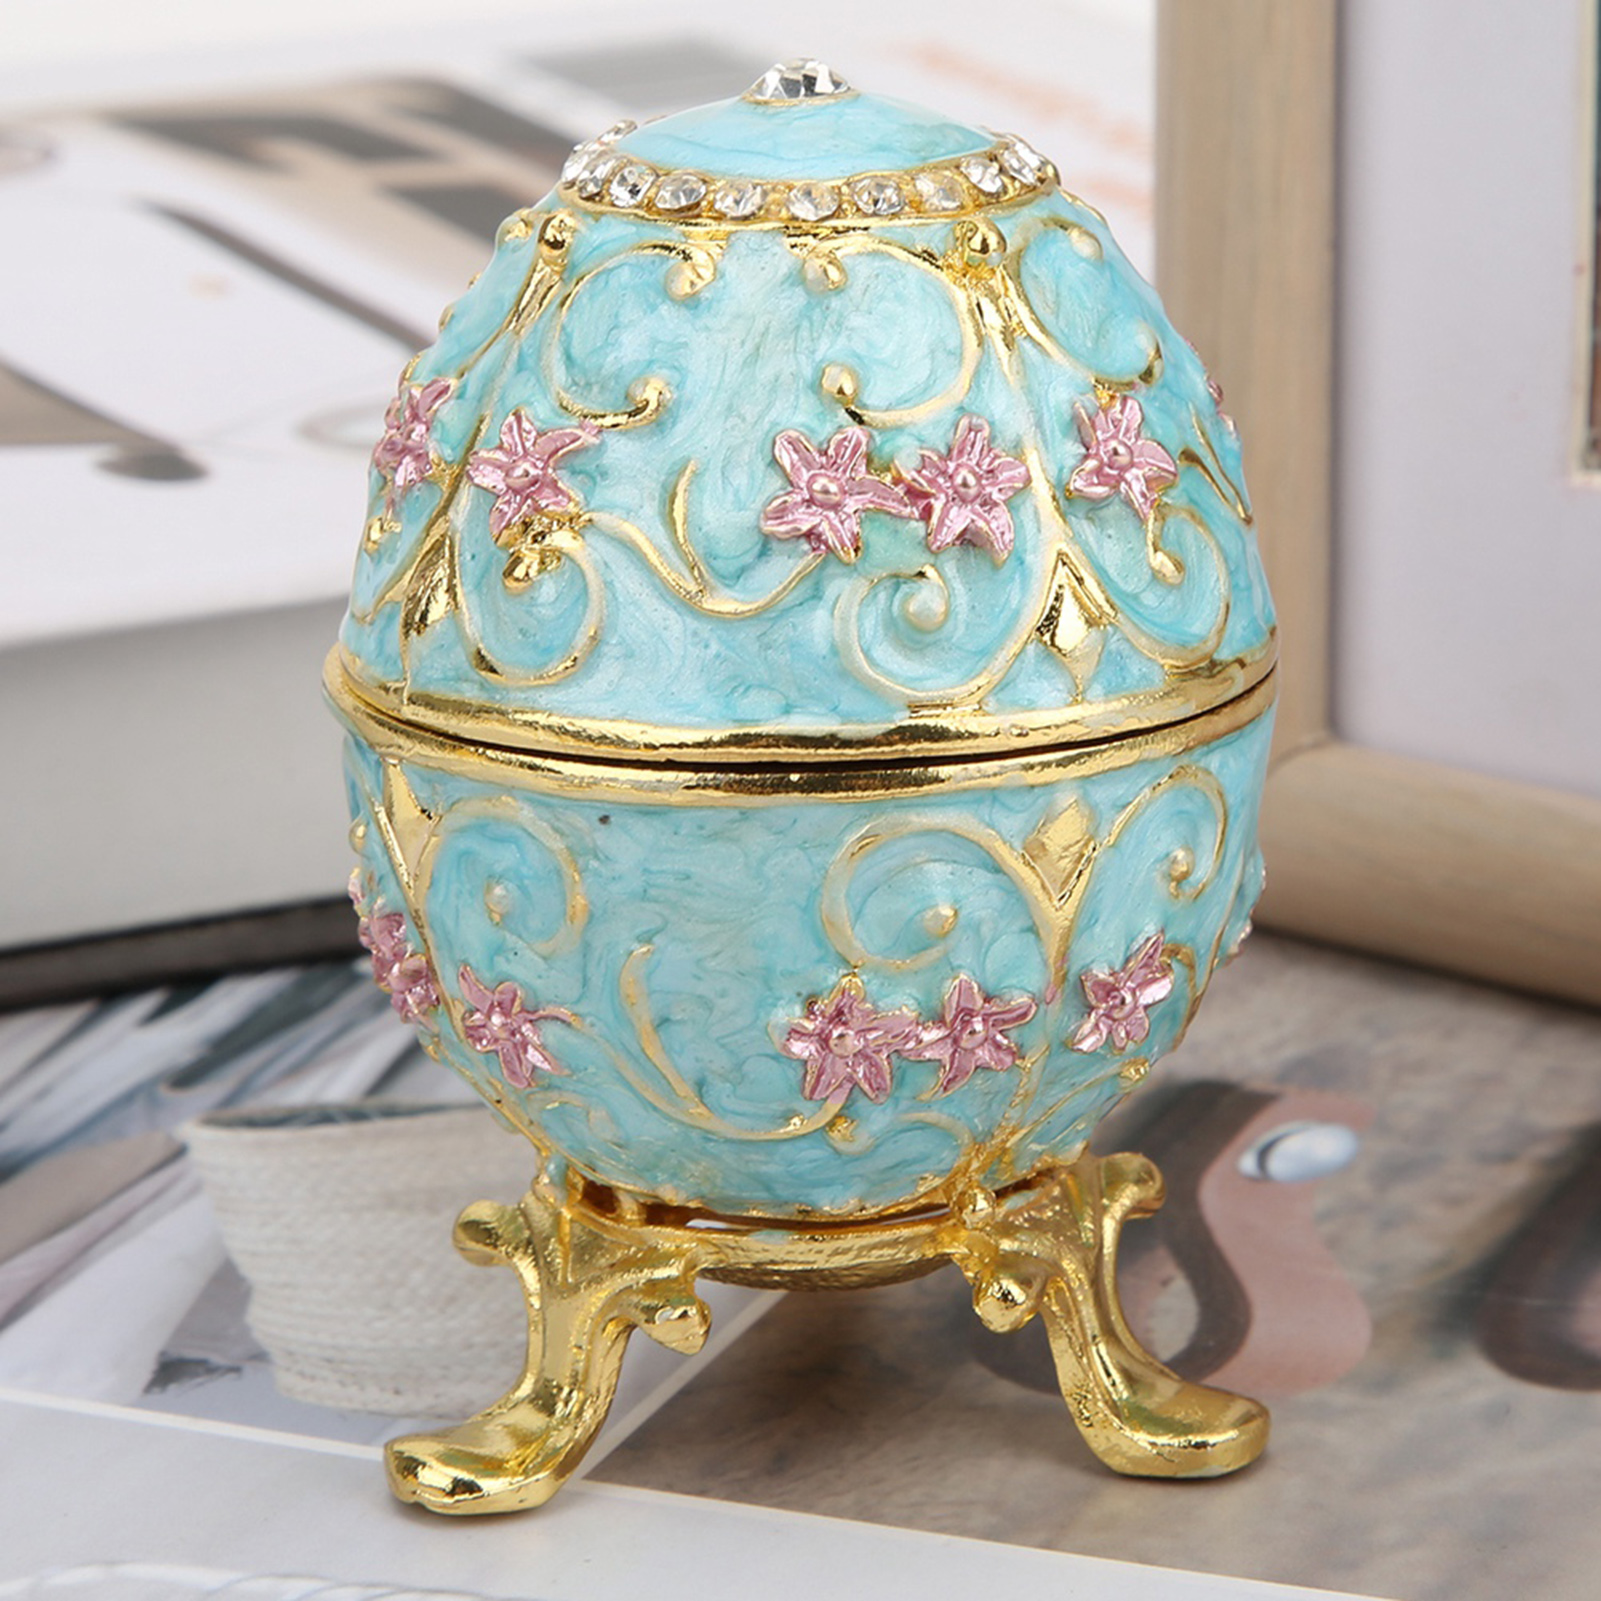 Faberge Egg, Decorative Hand-made Enameled Easter Egg Box, Metal For Women Home Ornaments Desktop Decor Gifts - image 1 of 8